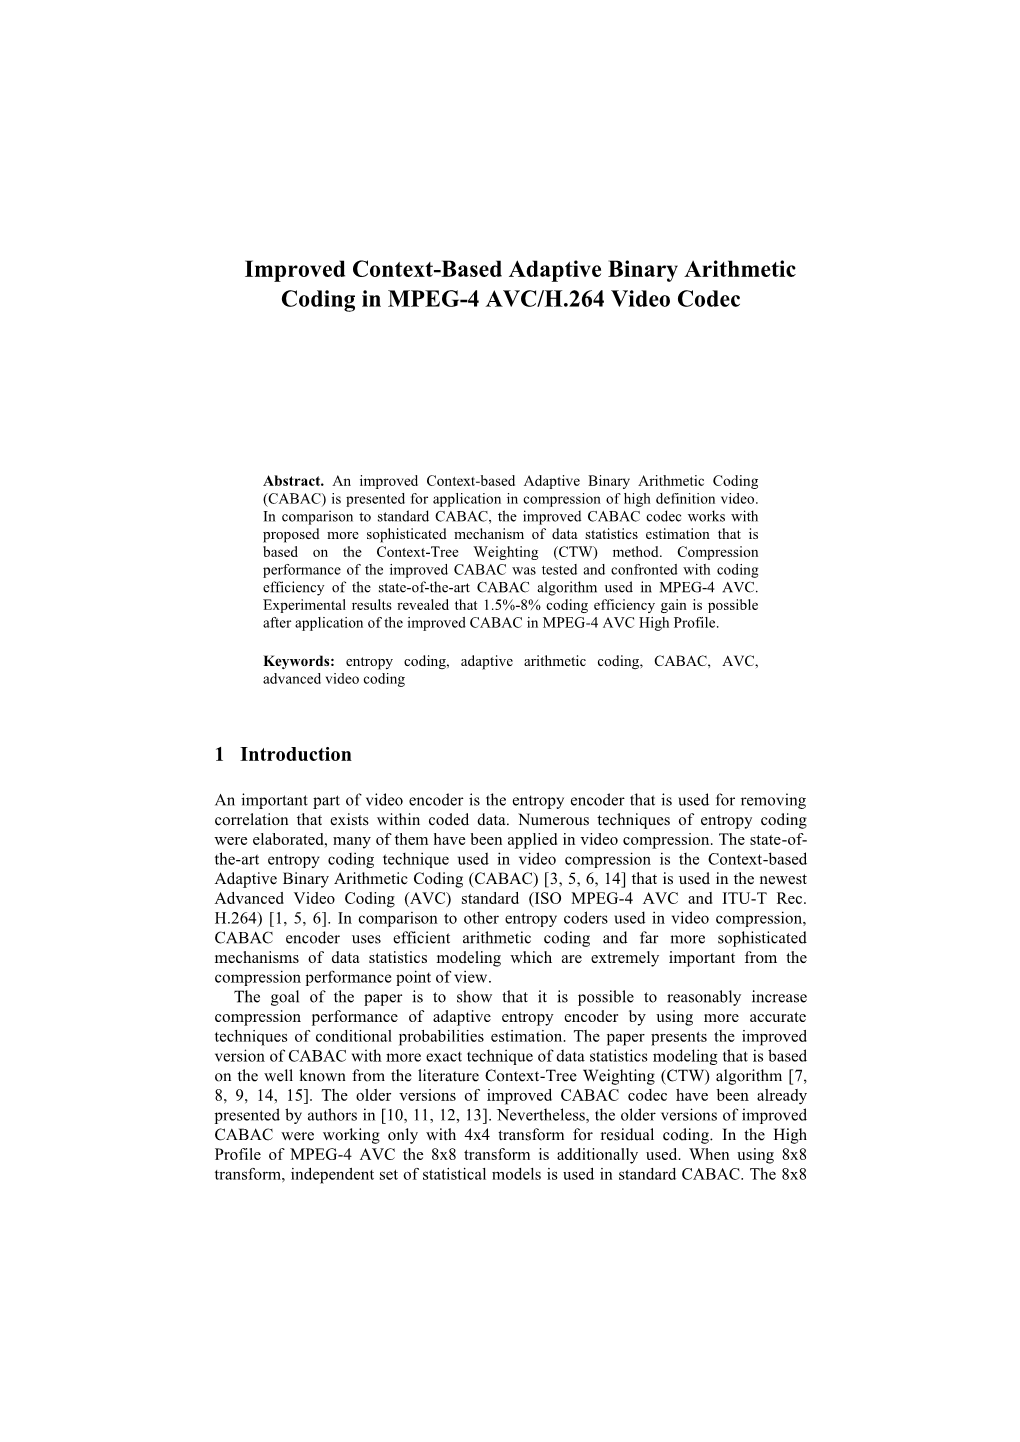 Improved Context-Based Adaptive Binary Arithmetic Coding in MPEG-4 AVC/H.264 Video Codec